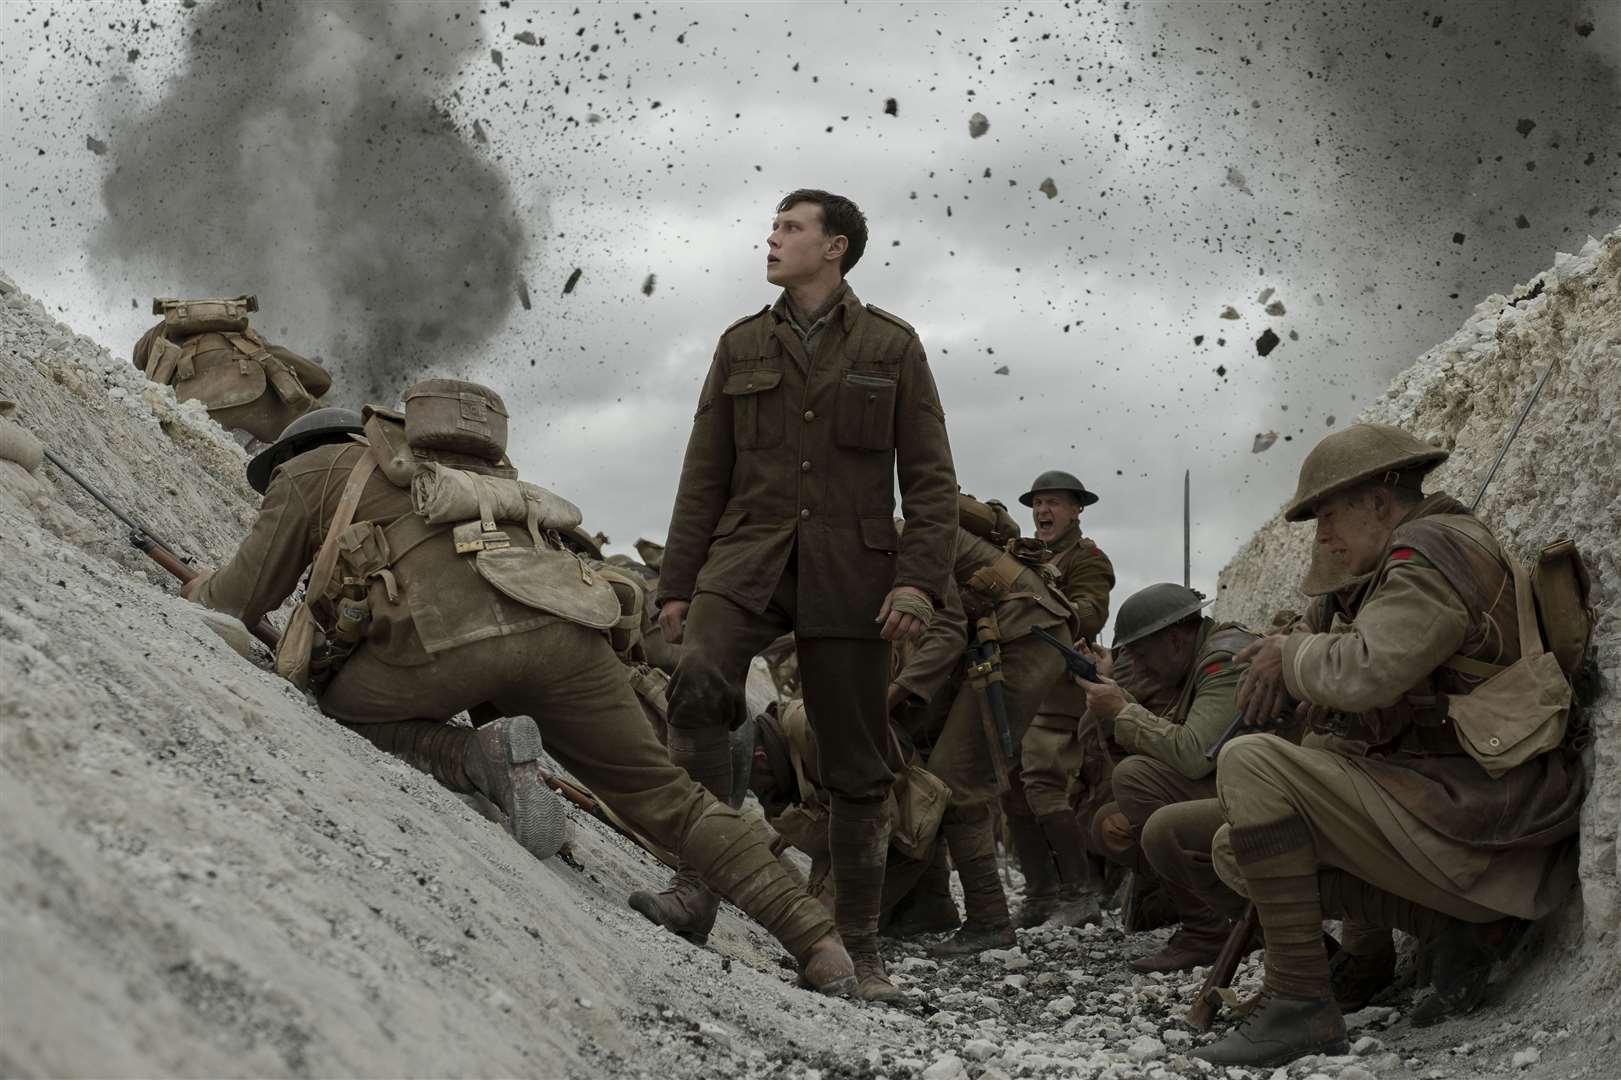 George MacKay as Lance Corporal William Schofield in 1917 Picture: Universal Pictures/DreamWorks Pictures/Storyteller Distribution Co., LLC/Francois Duhamel